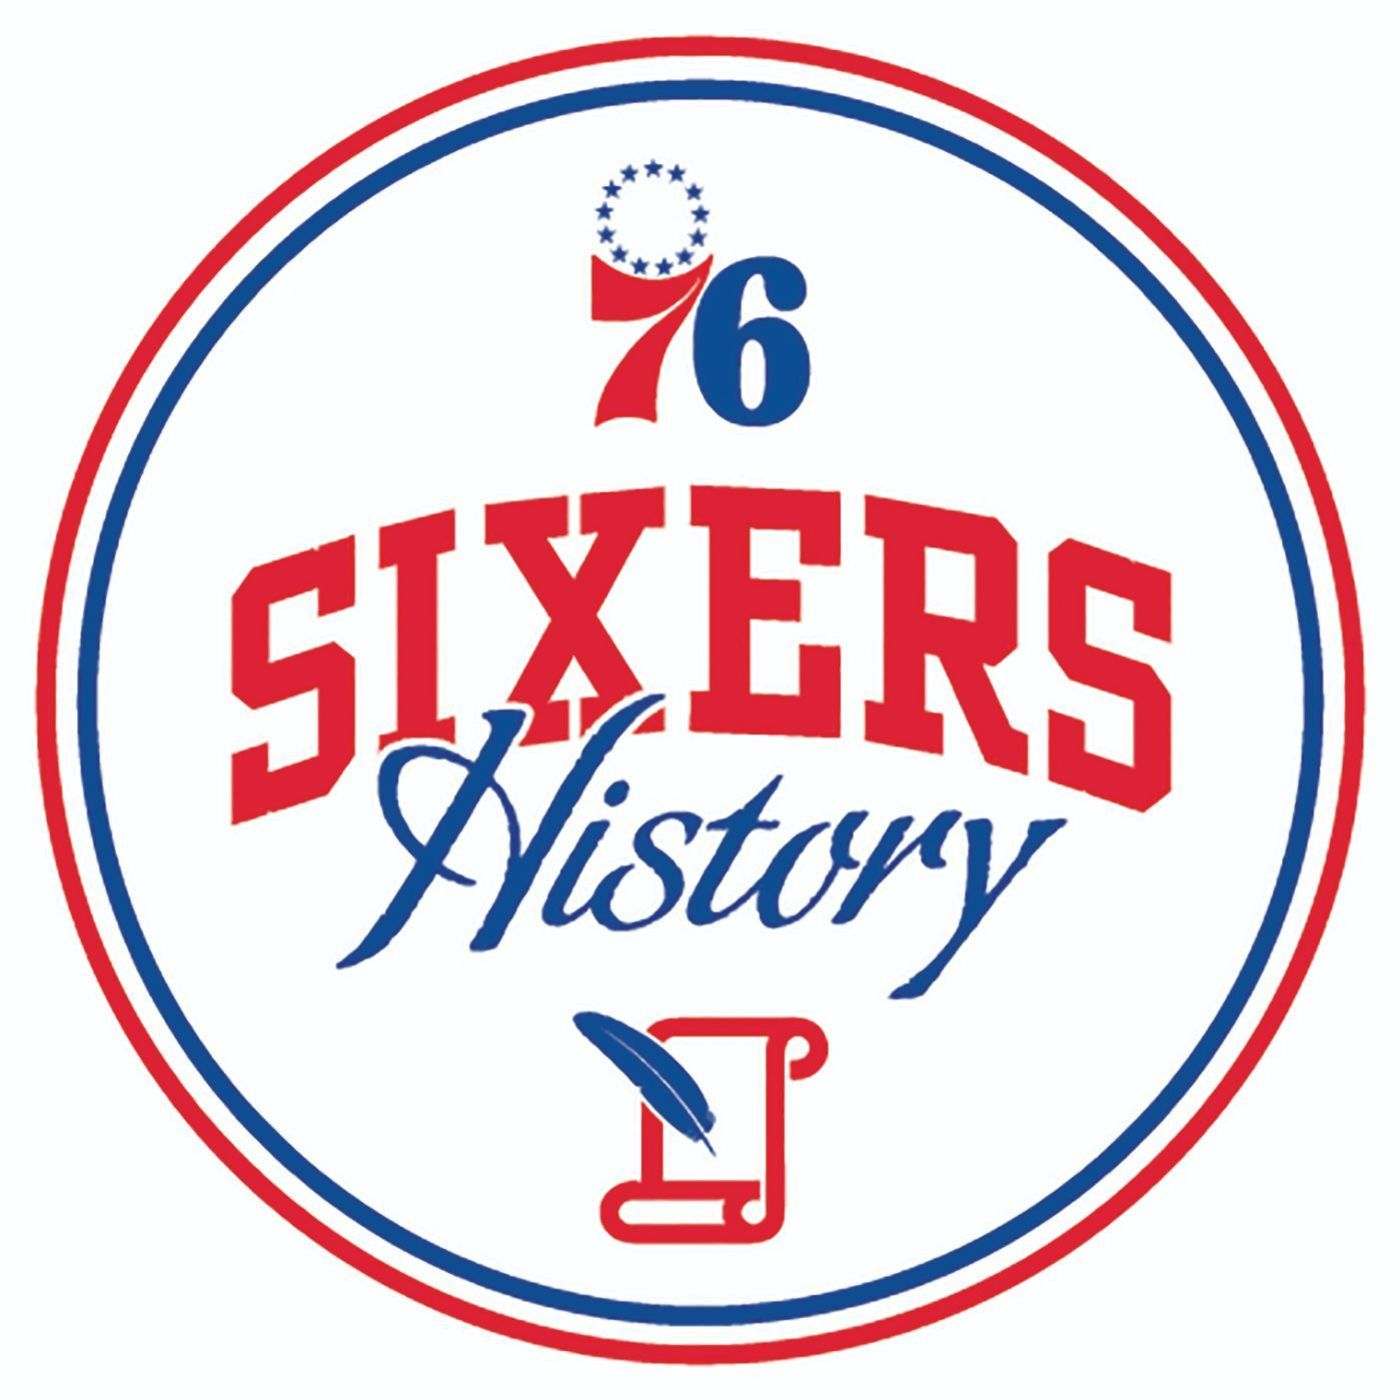 The Sixers History Podcast: Memories of Moses Malone ~ Fred Carter